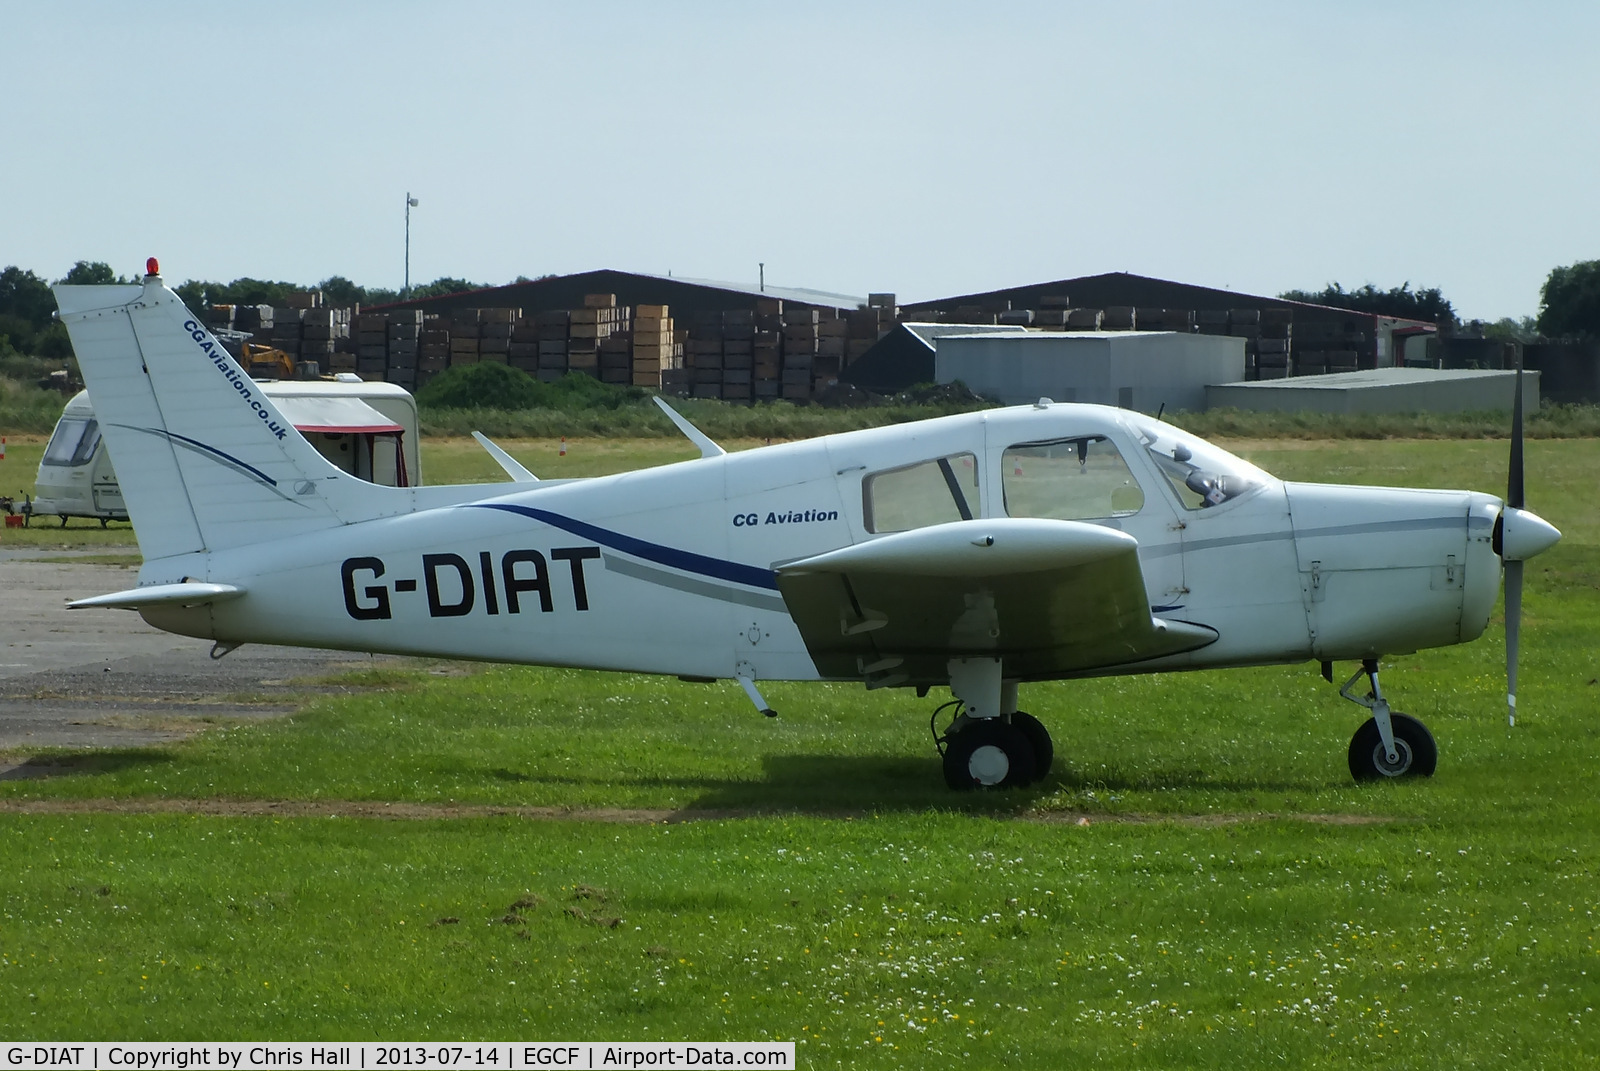 G-DIAT, 1974 Piper PA-28-140 Cherokee Cruiser C/N 28-7425322, privately owned